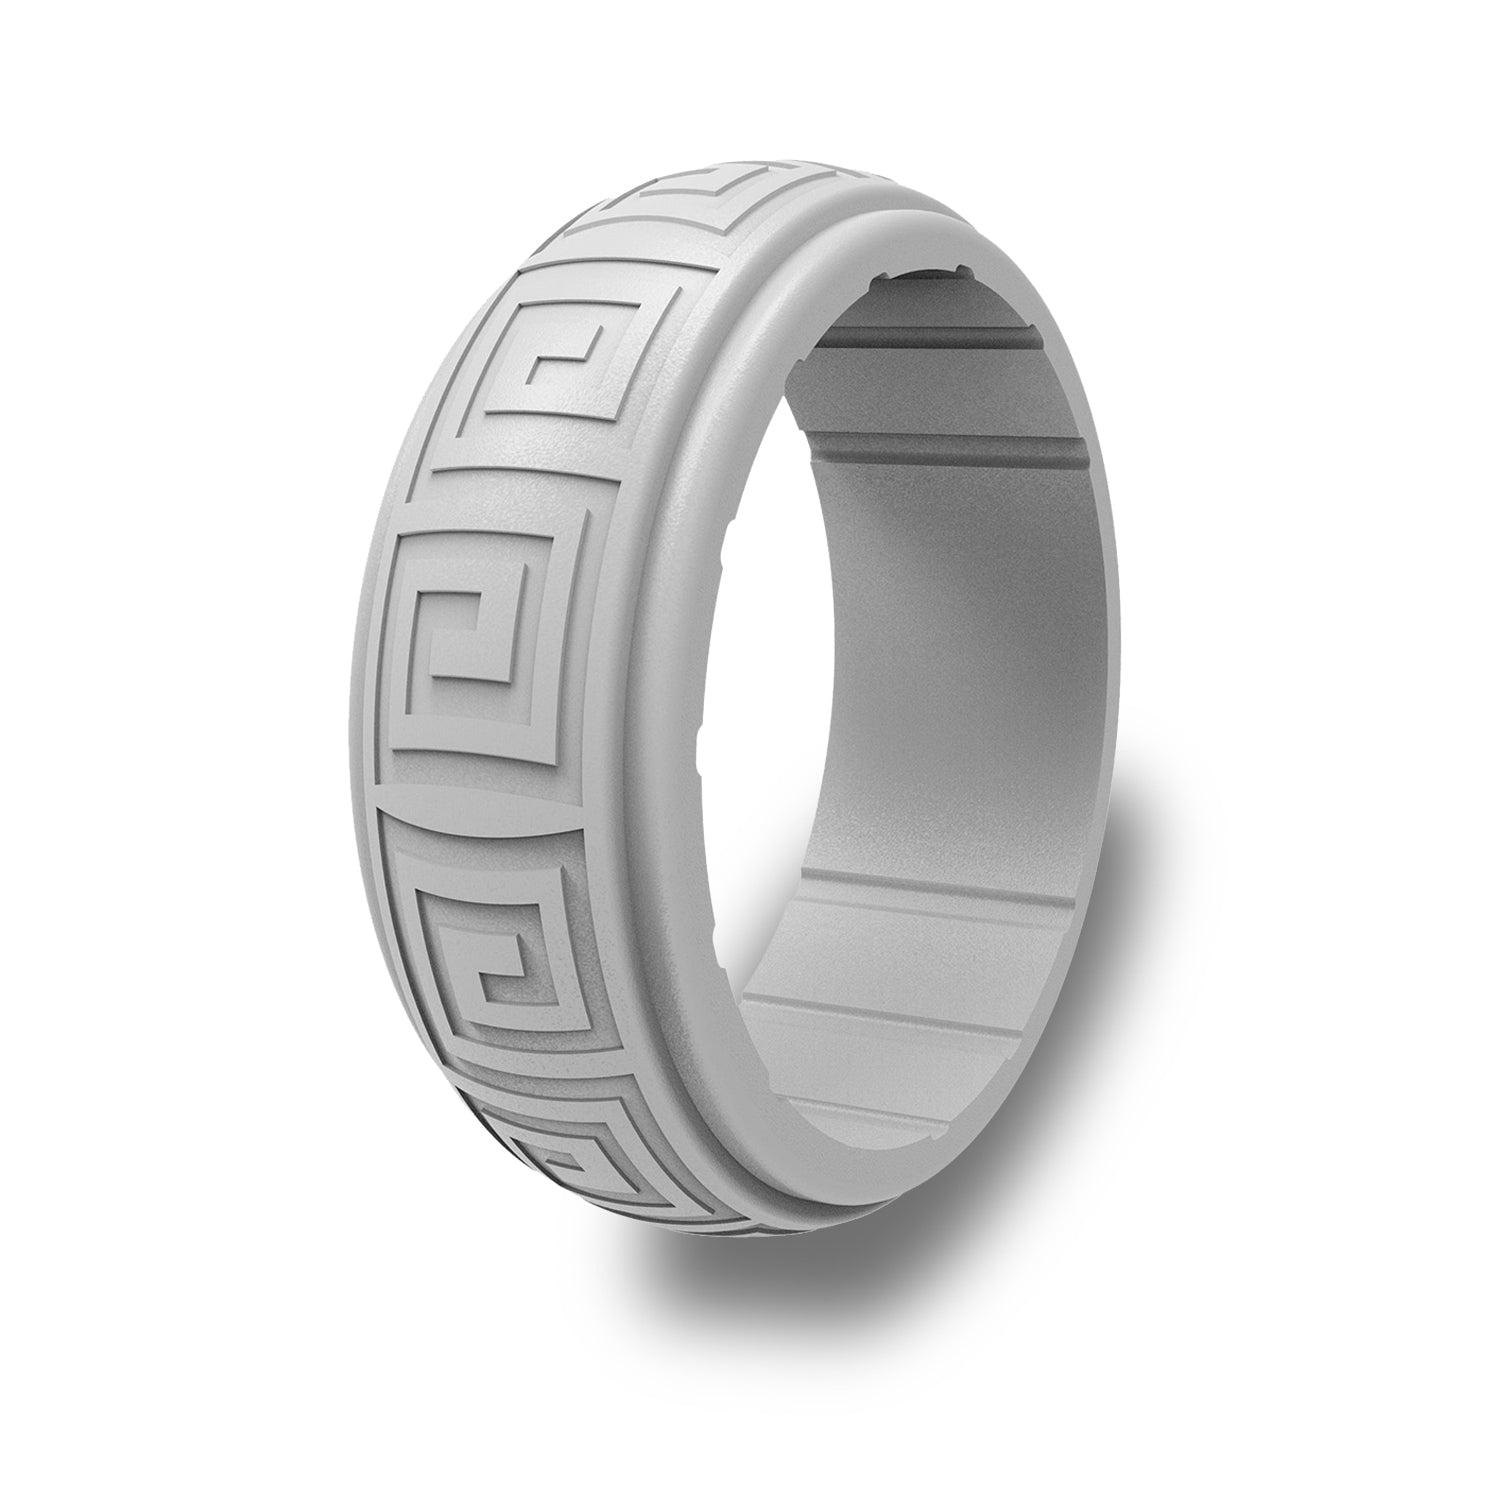 The Myth - Silicone Ring